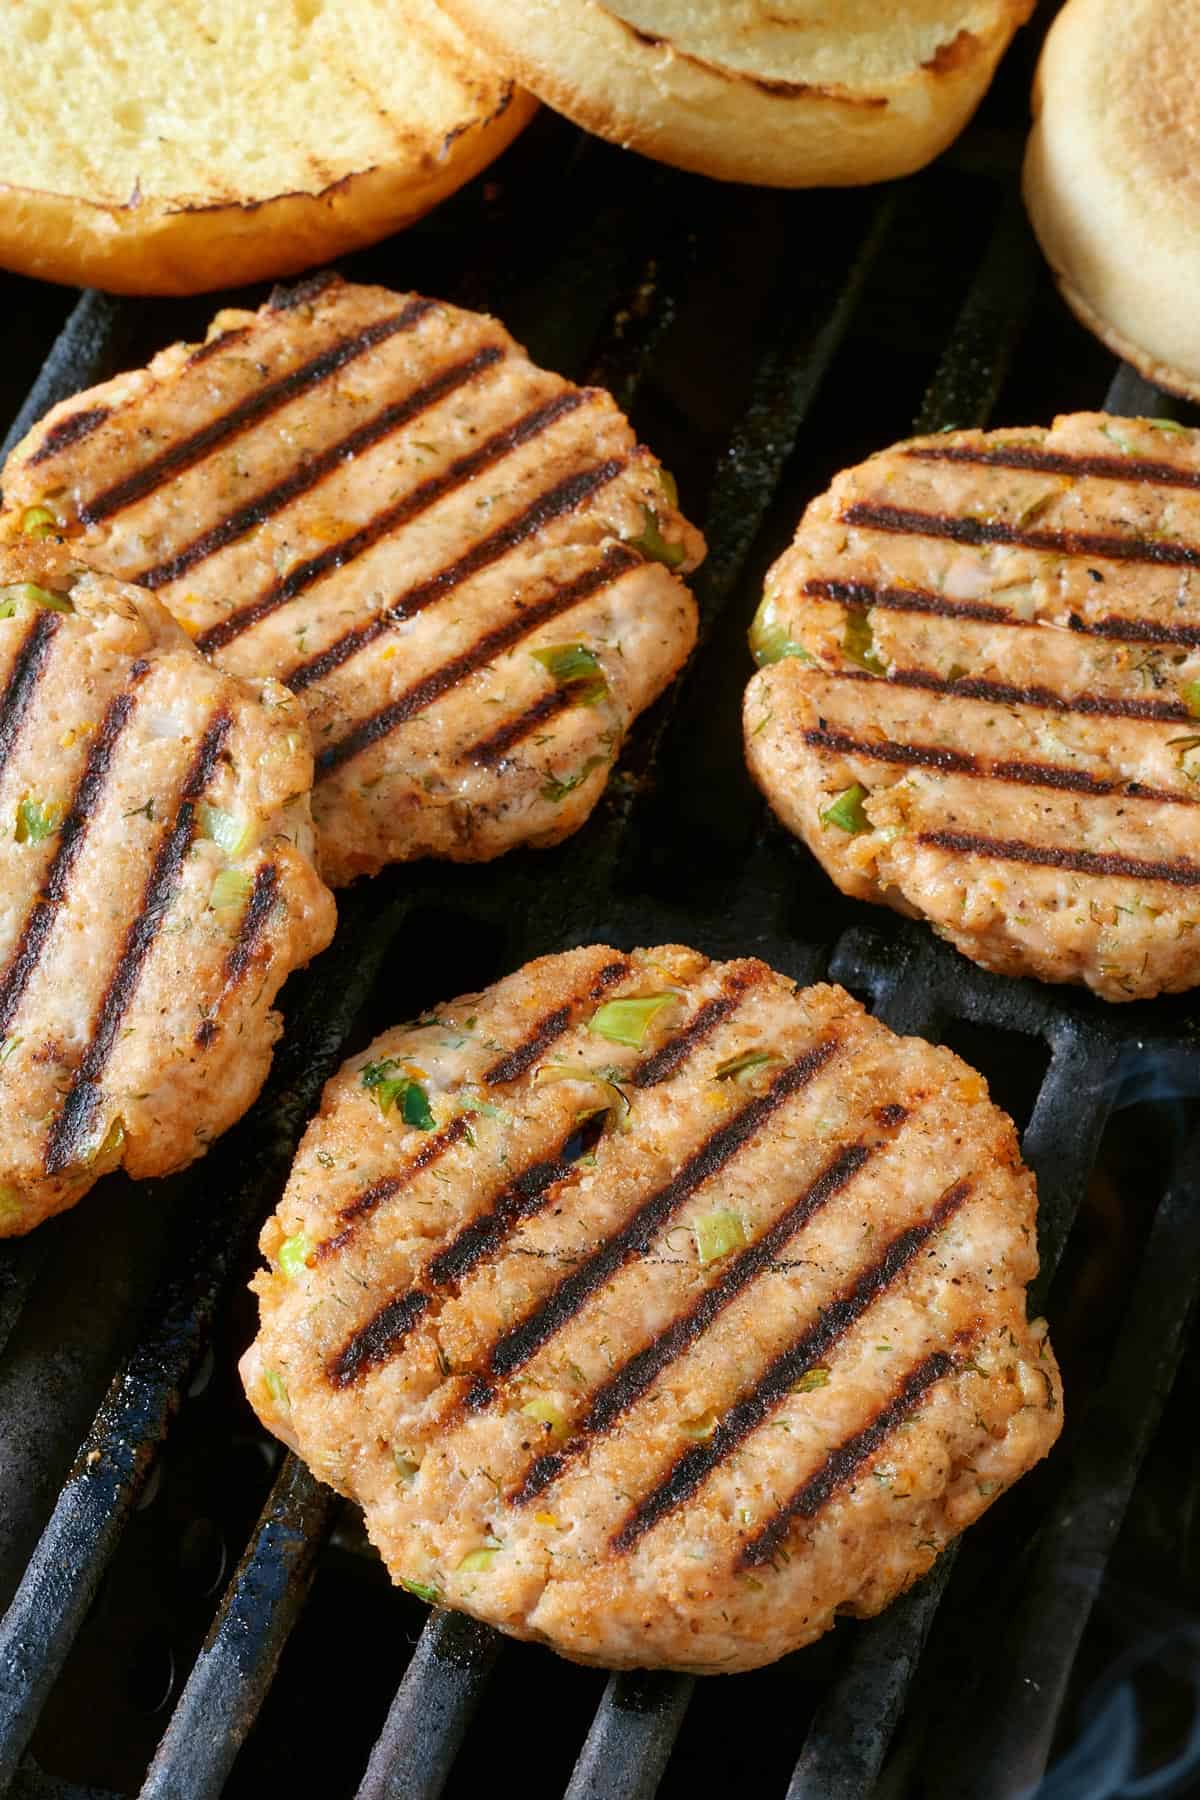 Salmon burgers cooking on a grill.